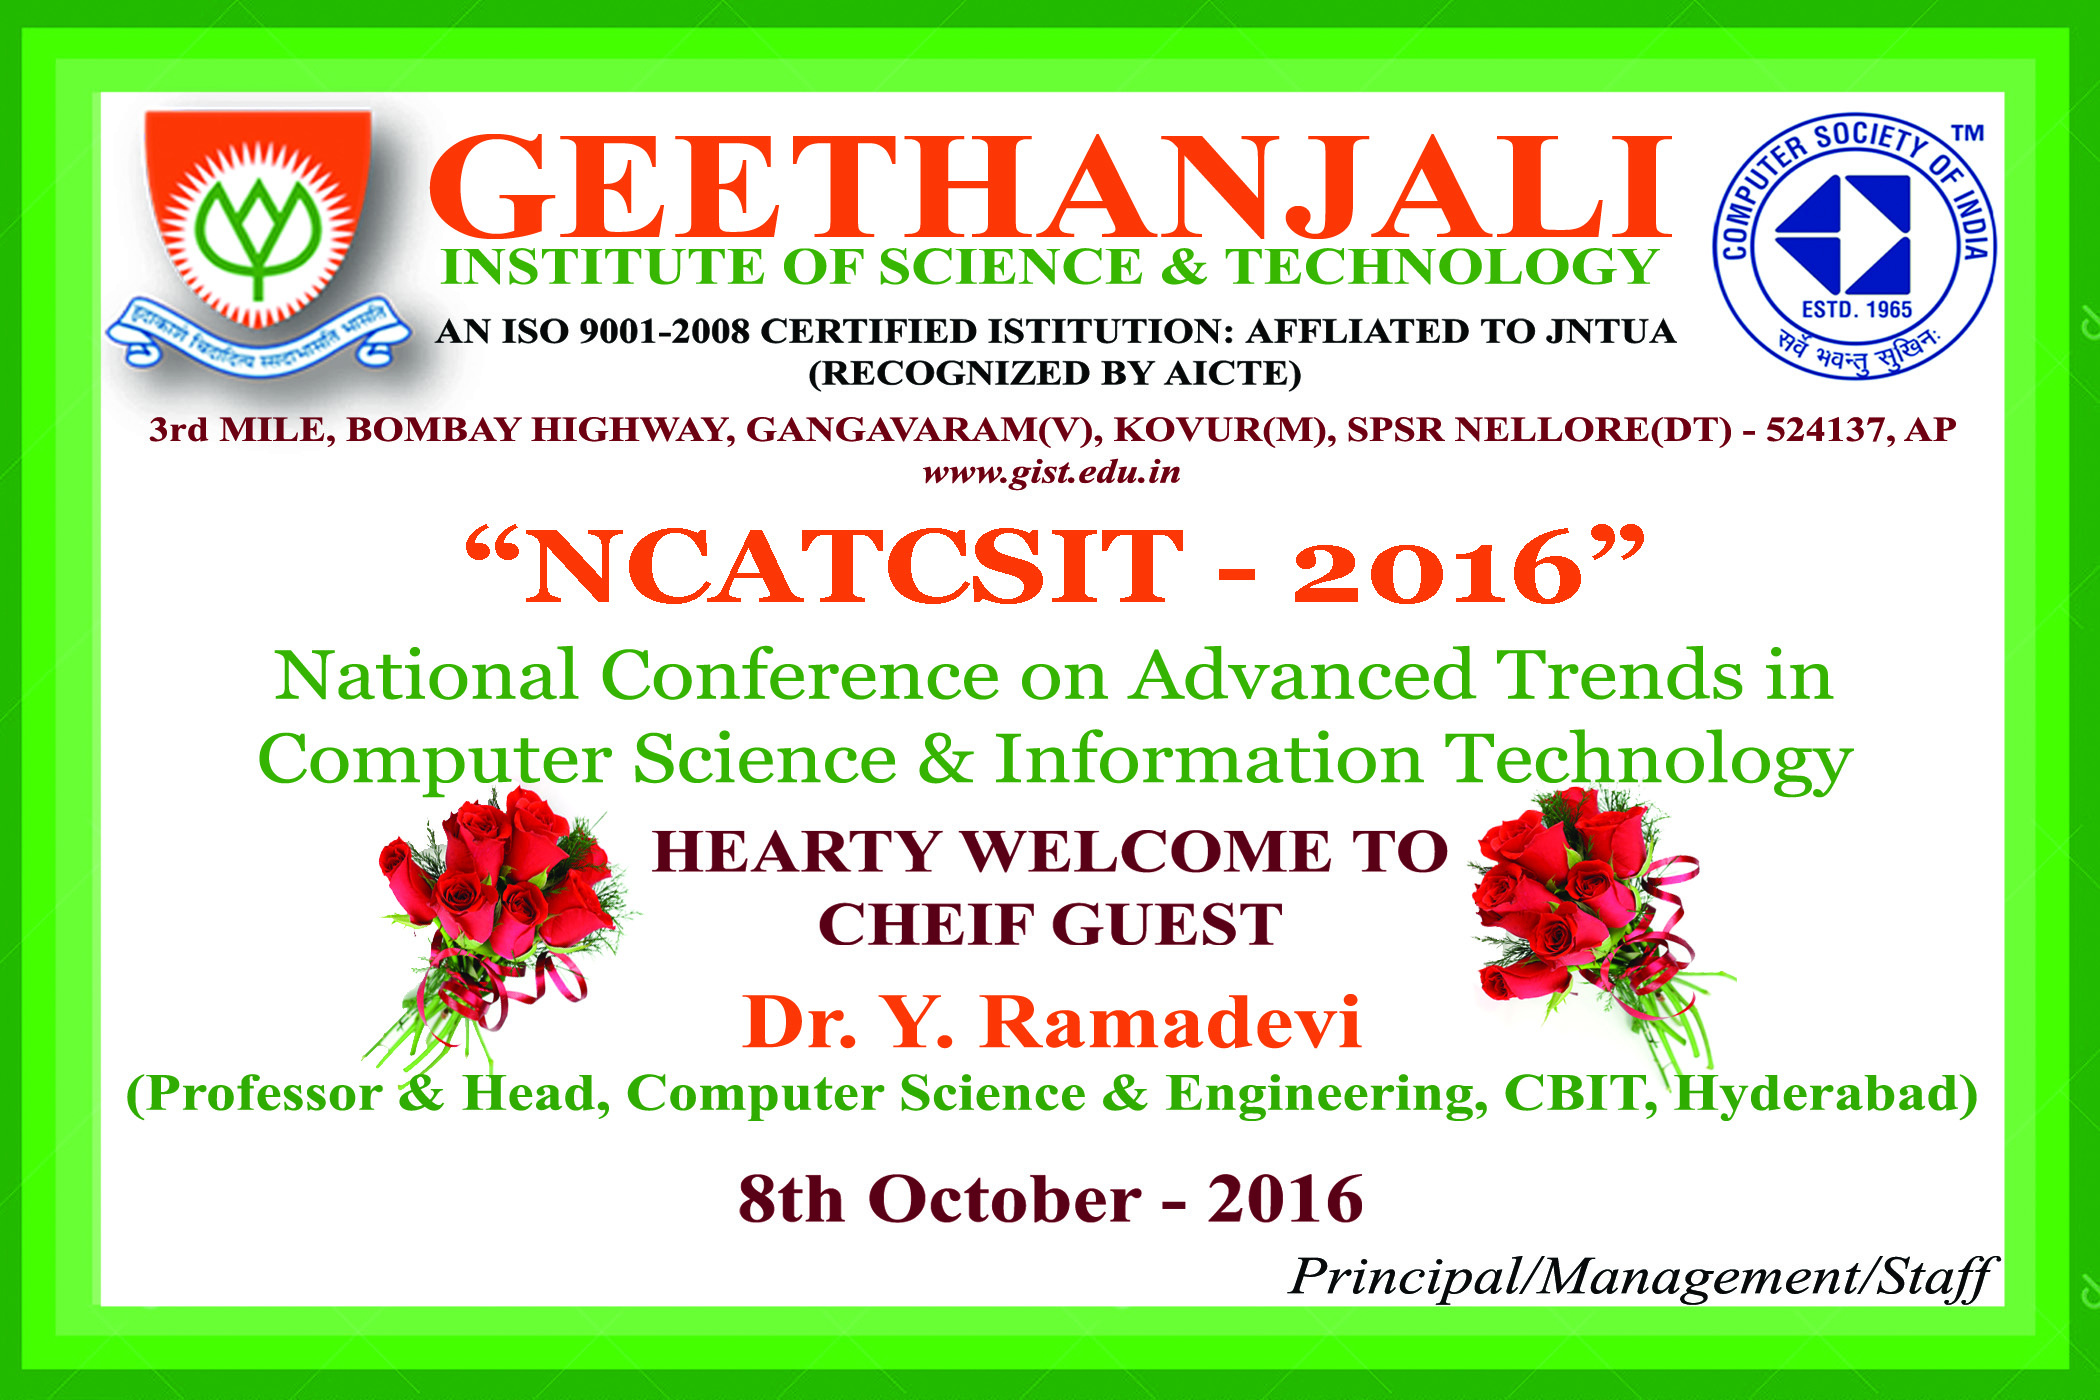 National Conference on Advanced Trends in Computer Science and Information Technology